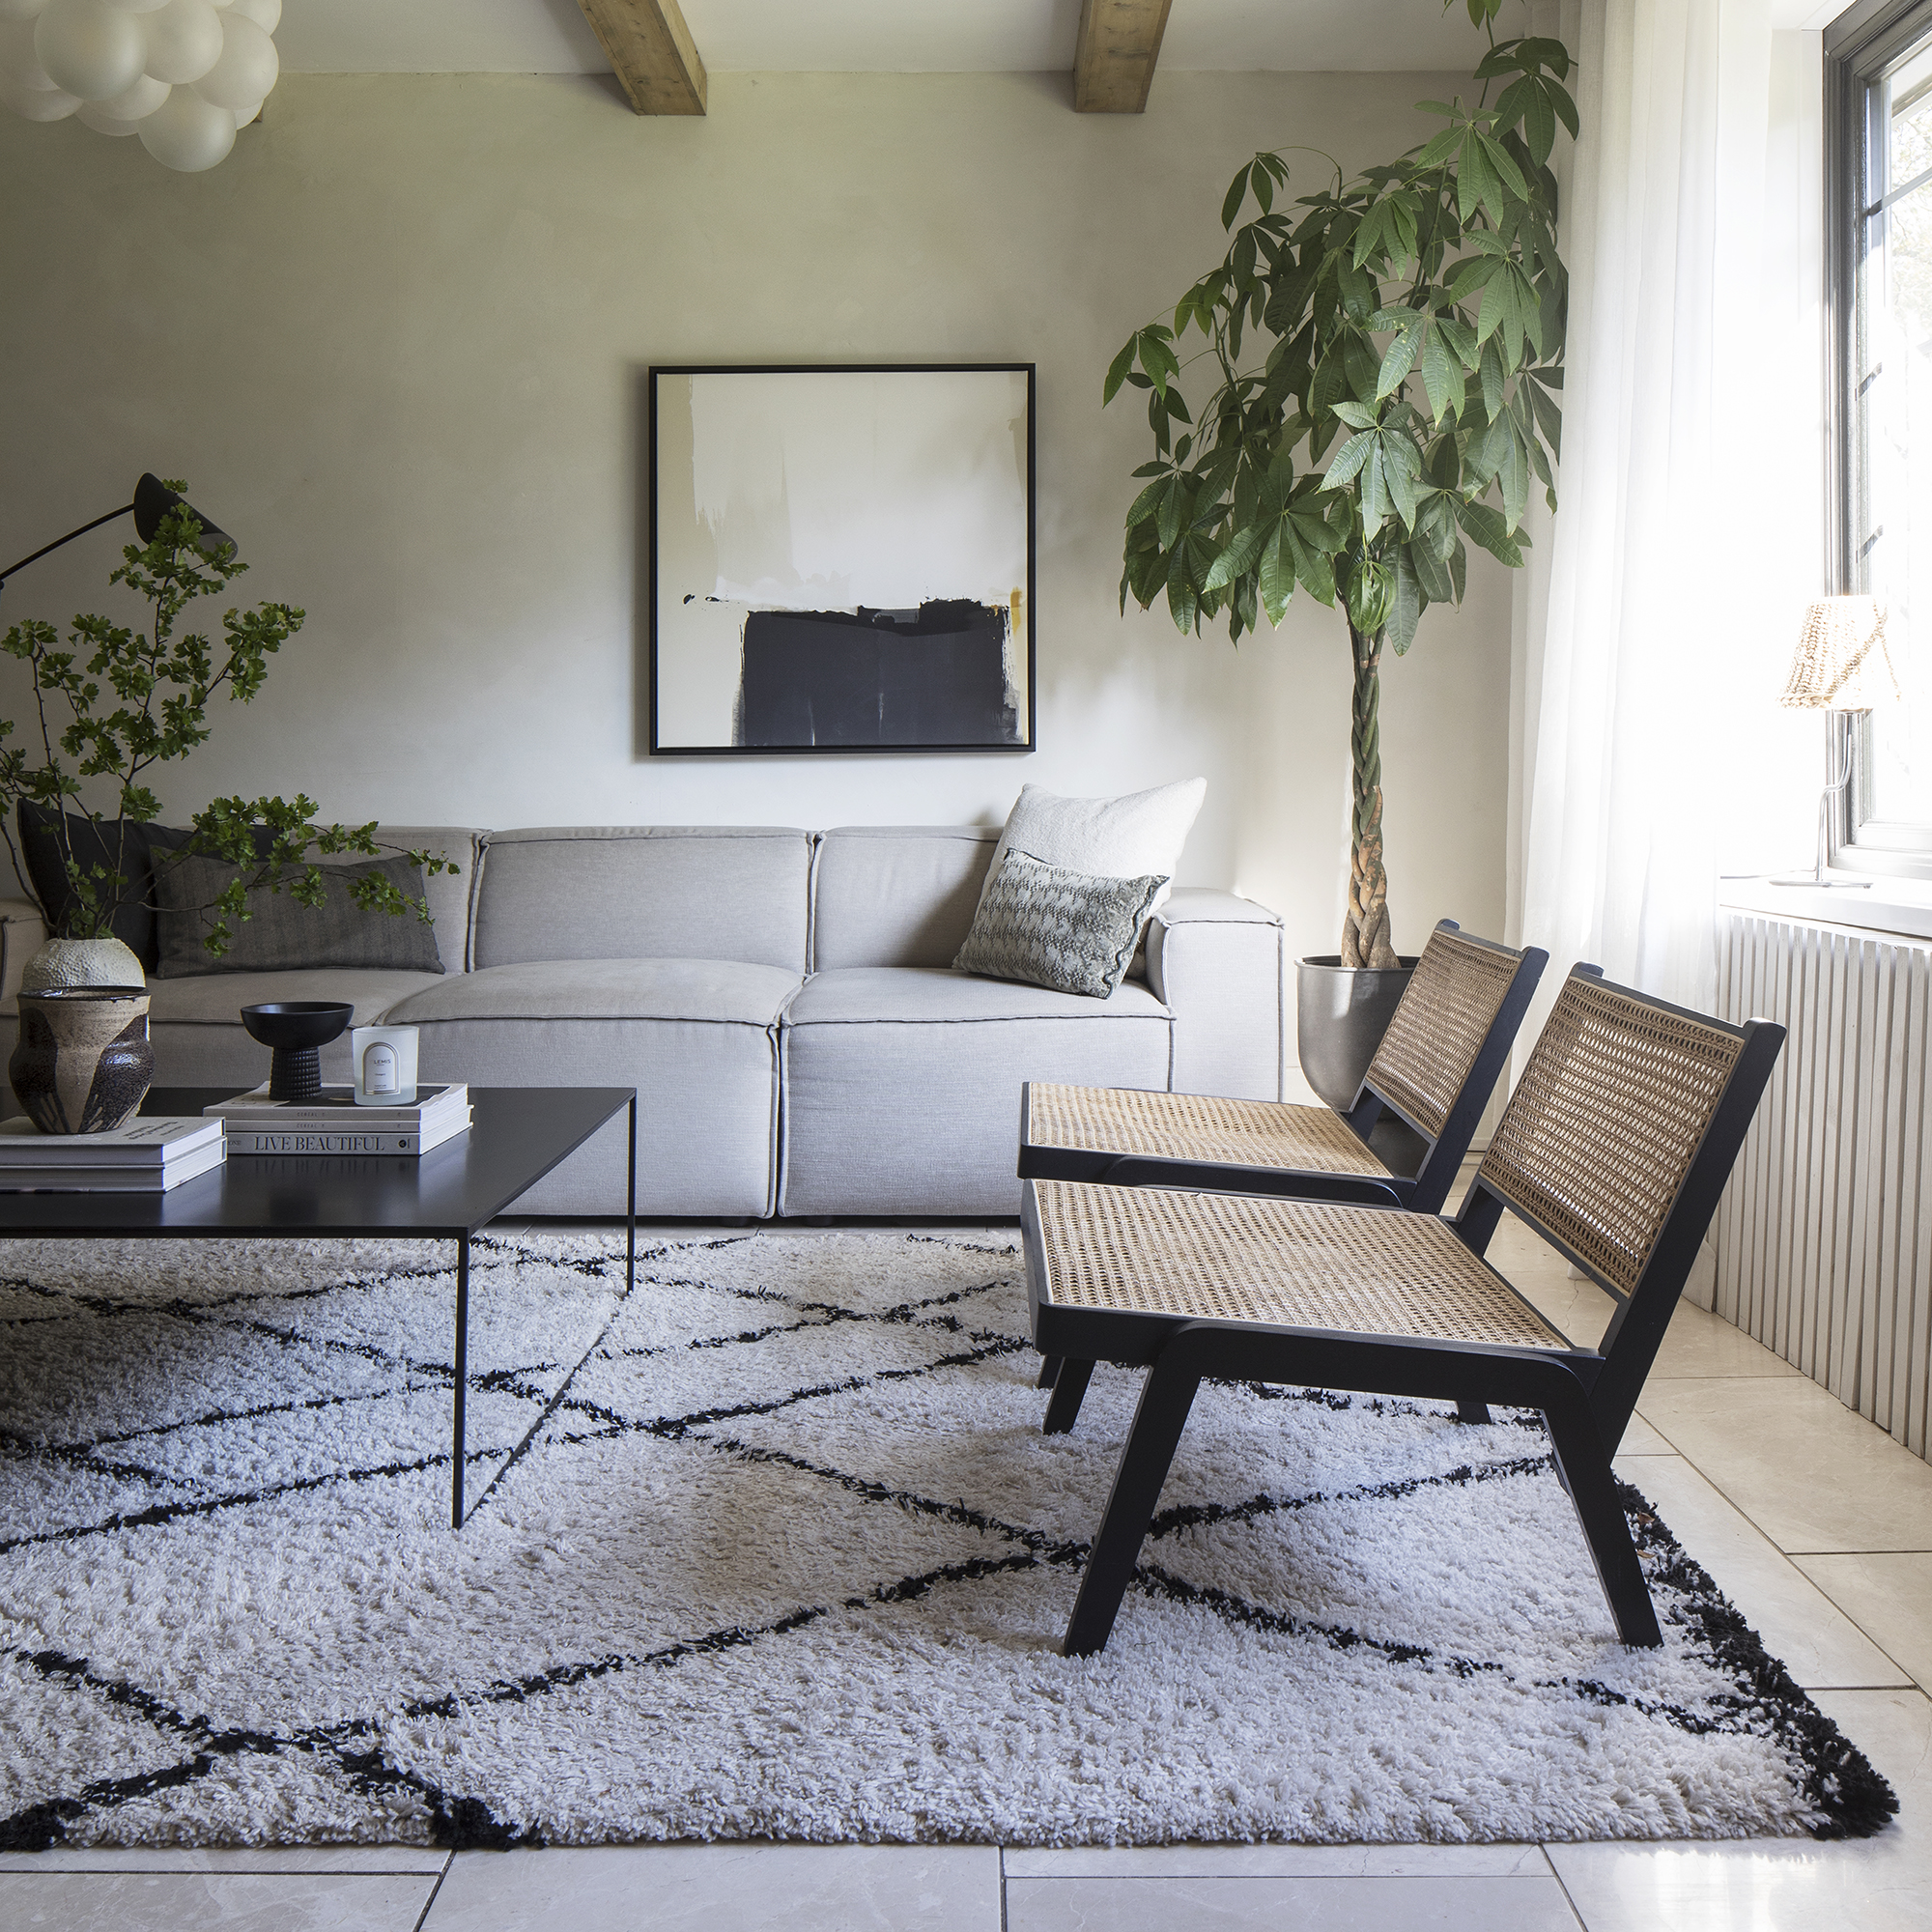 2 Add texture and warmth with a gray rug